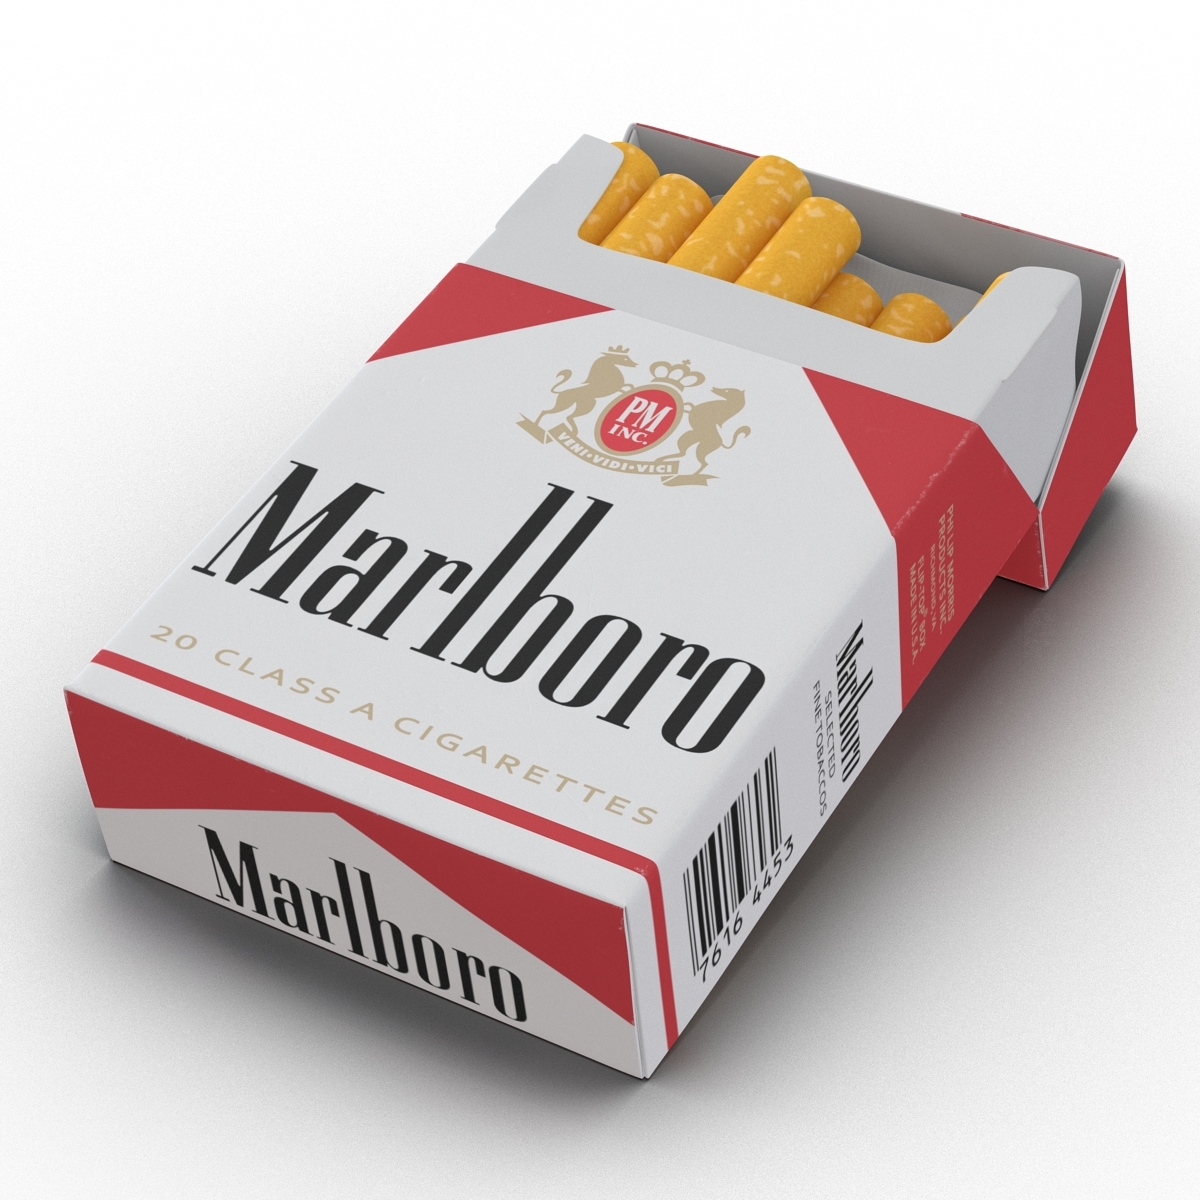 Мальбора. Пачка сигарет Мальборо. Пачка сигарет Marlboro. Открытая пачка сигарет Мальборо. Marlboro Старая упаковка.